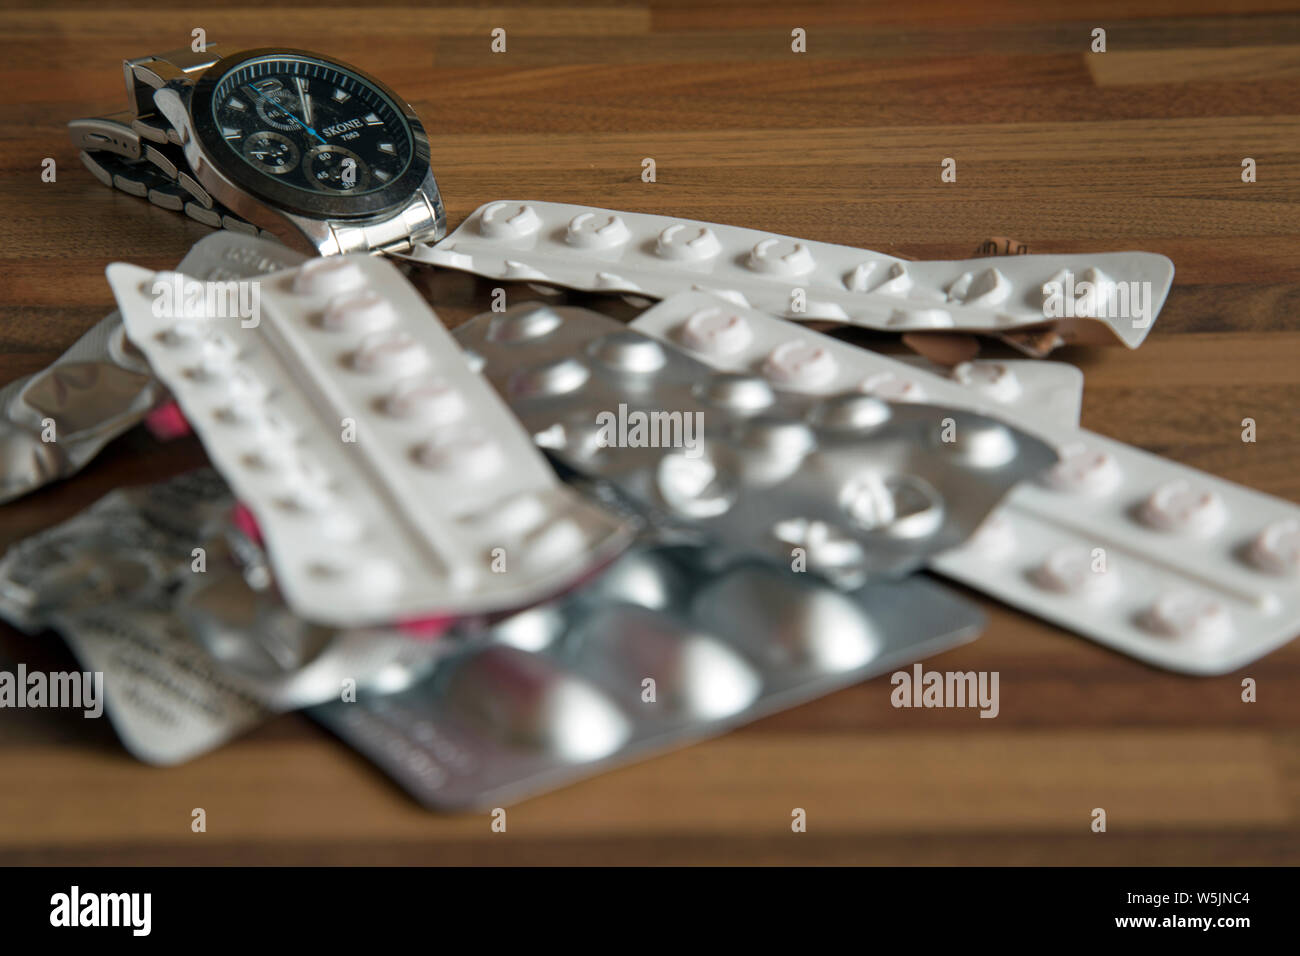 Tabletop photograph of several strips of prescription drugs with a wristwatch in the background to indicate time-sensitive dosing. Stock Photo